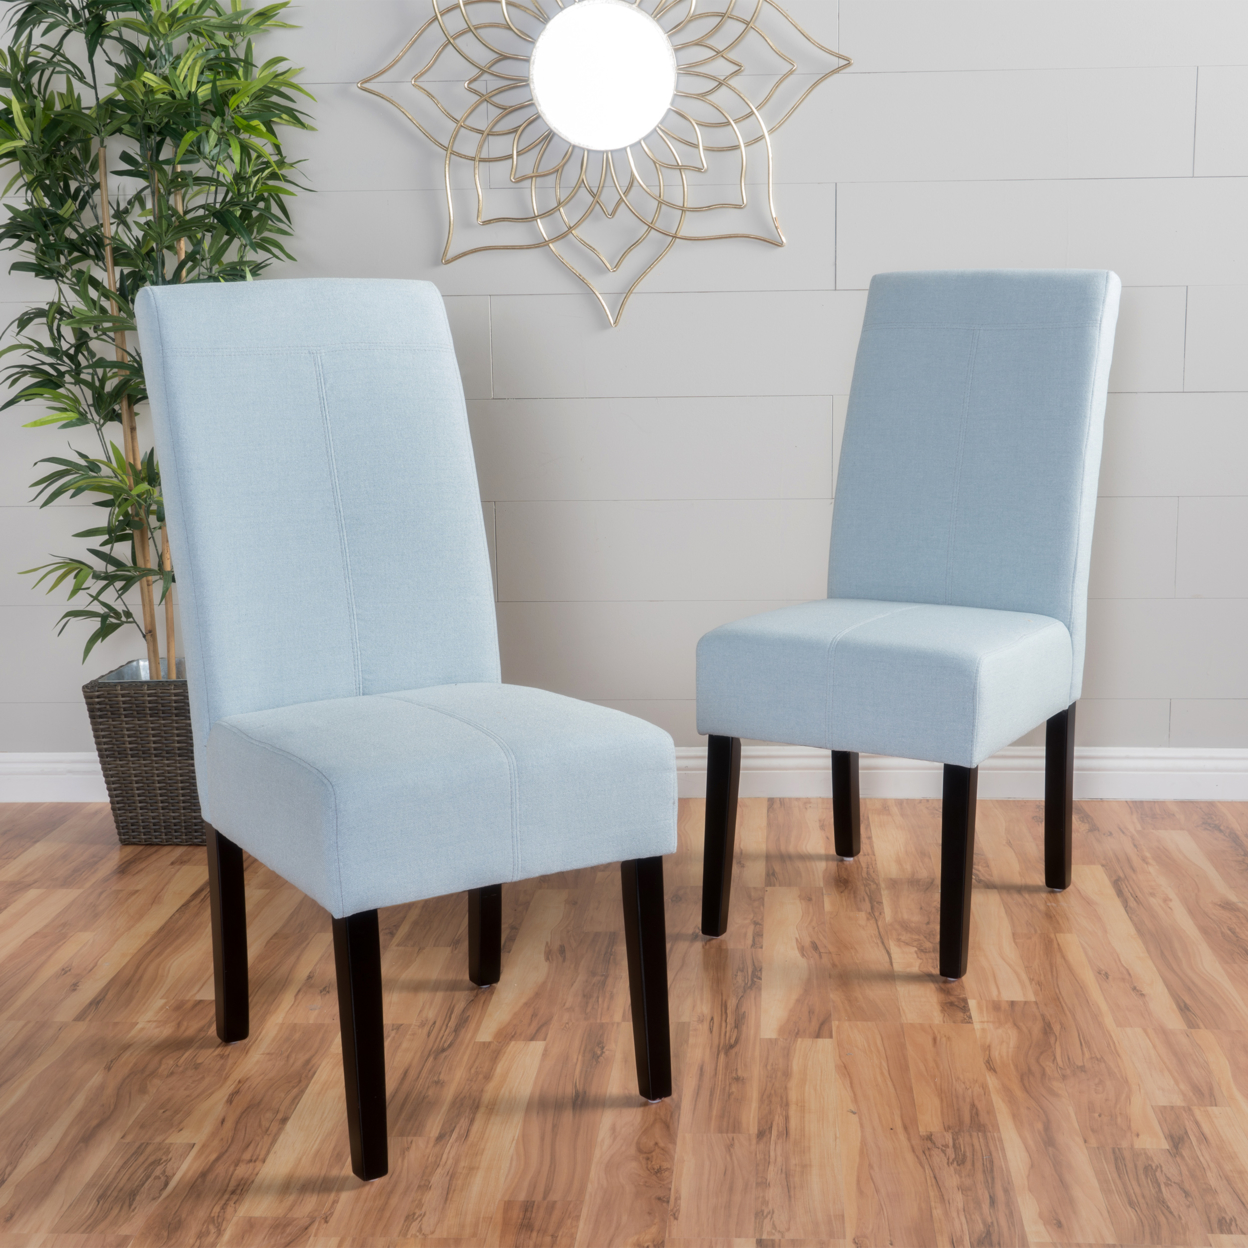 Lissa Contemporary T-Stitch Upholstered Dining Chairs (Set Of 2) - Natural, Fabric